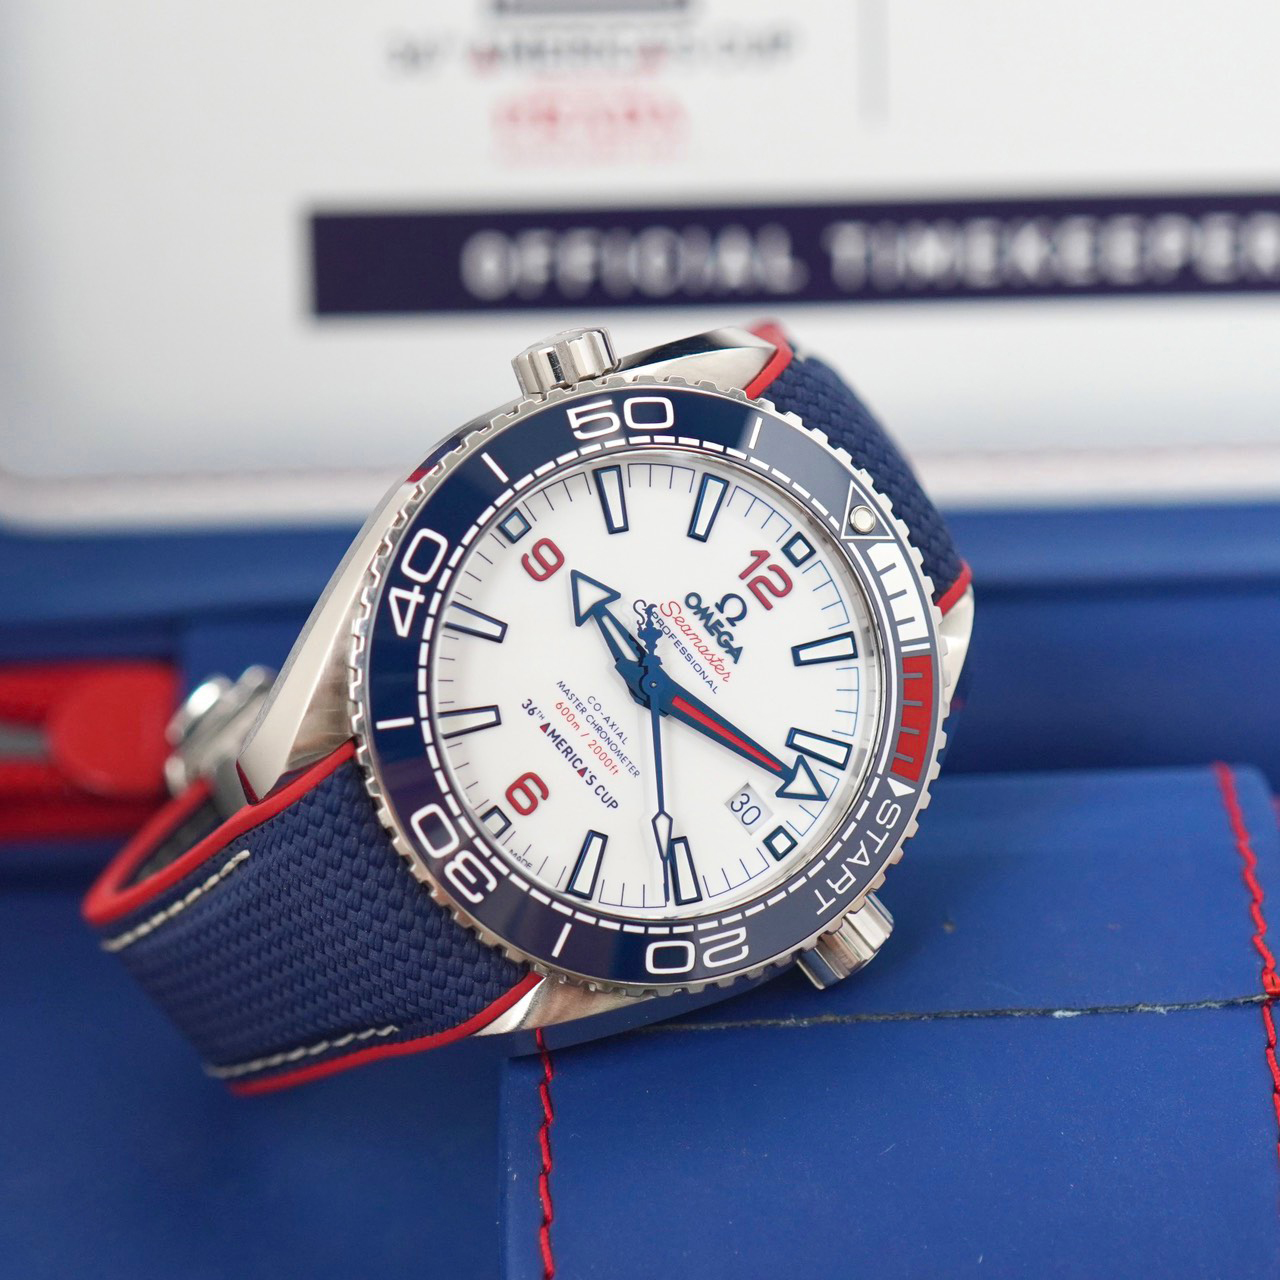 Omega Seamaster Planet Ocean 36th America's Cup Limited 215.32.43.21.04.001